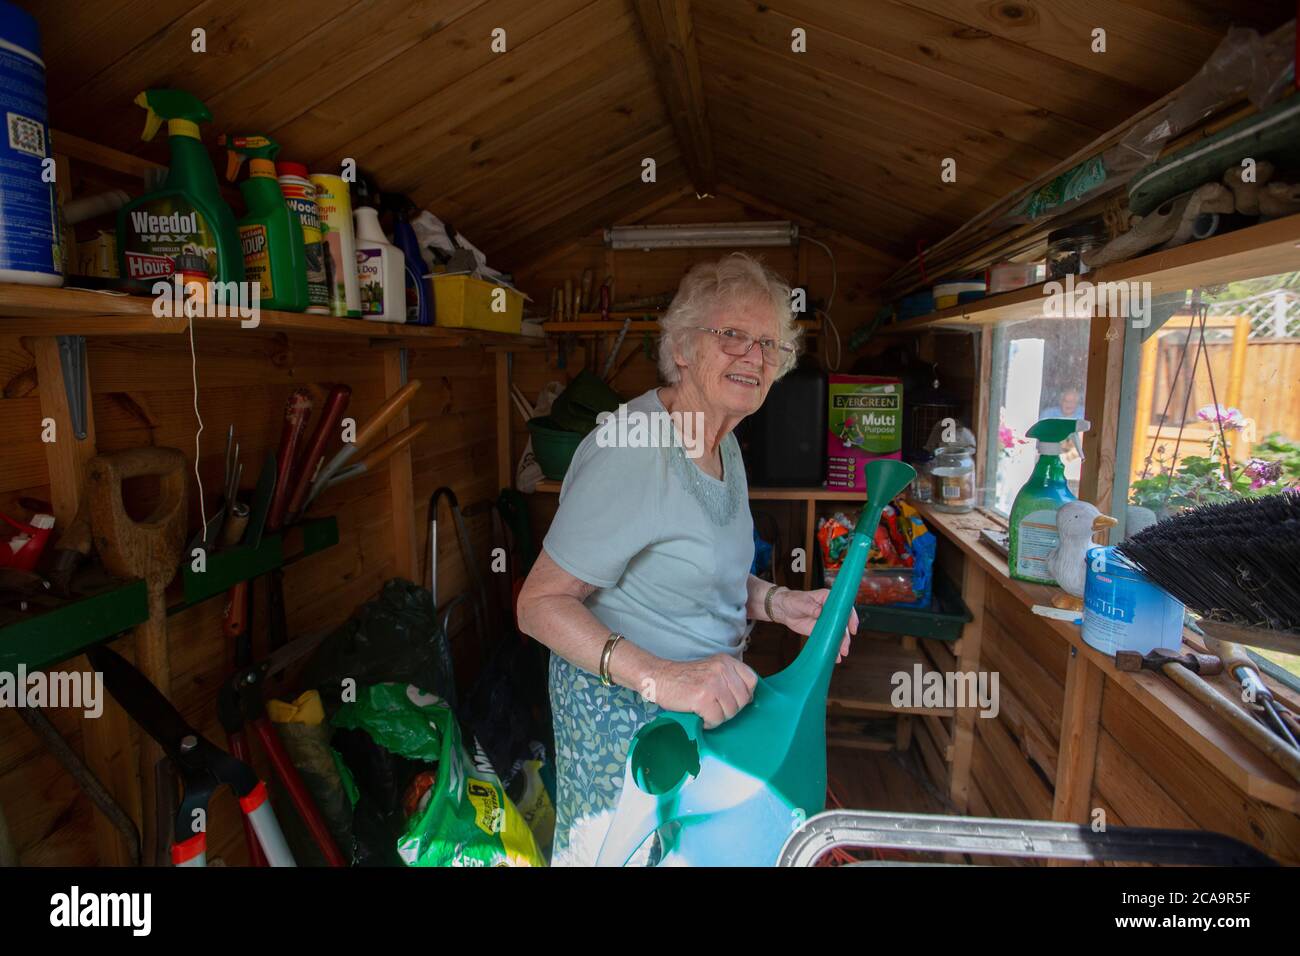 Elderly woman in her 80's carrying out gardening chores in her back residential garden, England, United Kingdom Stock Photo